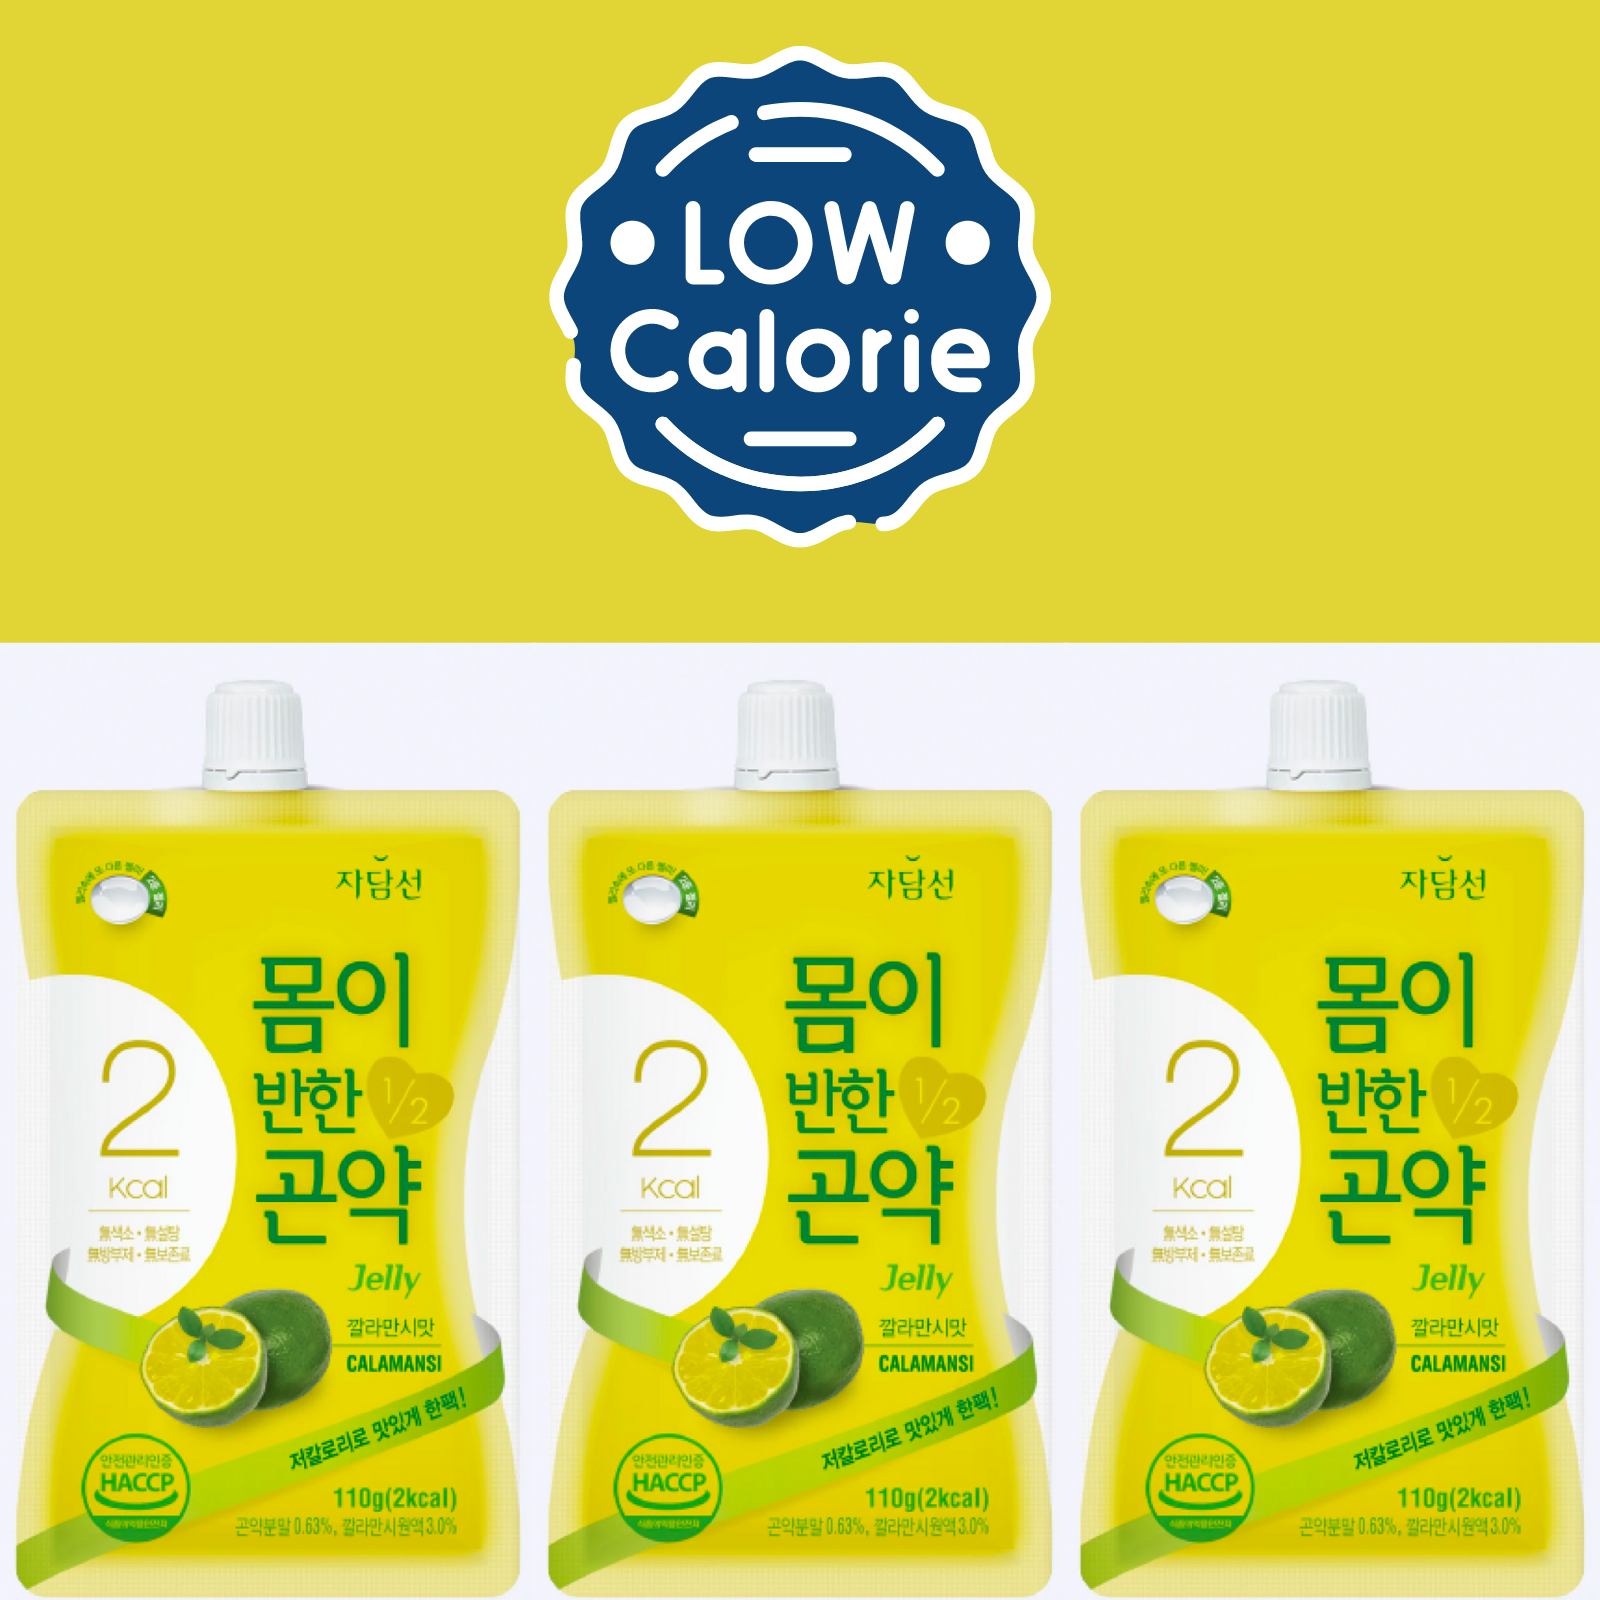 Healthy Low Calorie Double Konjac Jelly - Calamansi